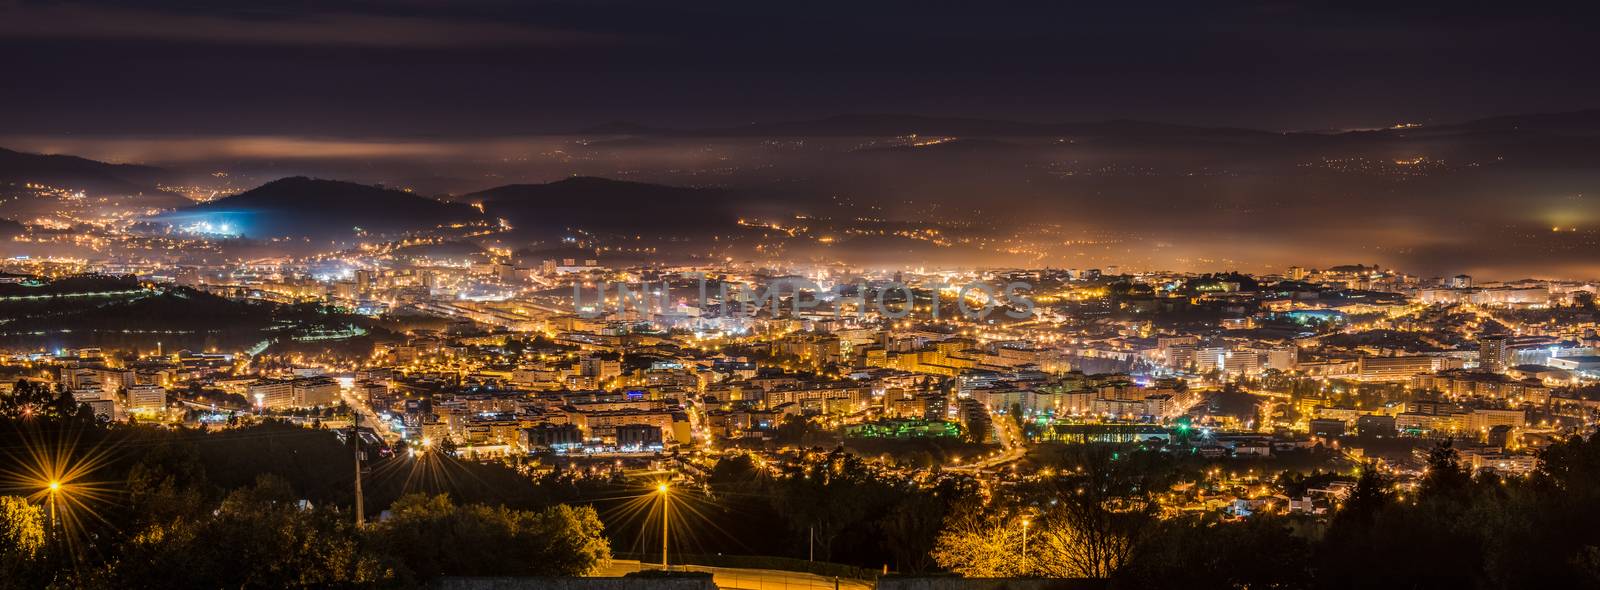 Panorama of lighted city of Braga at night, Portugal